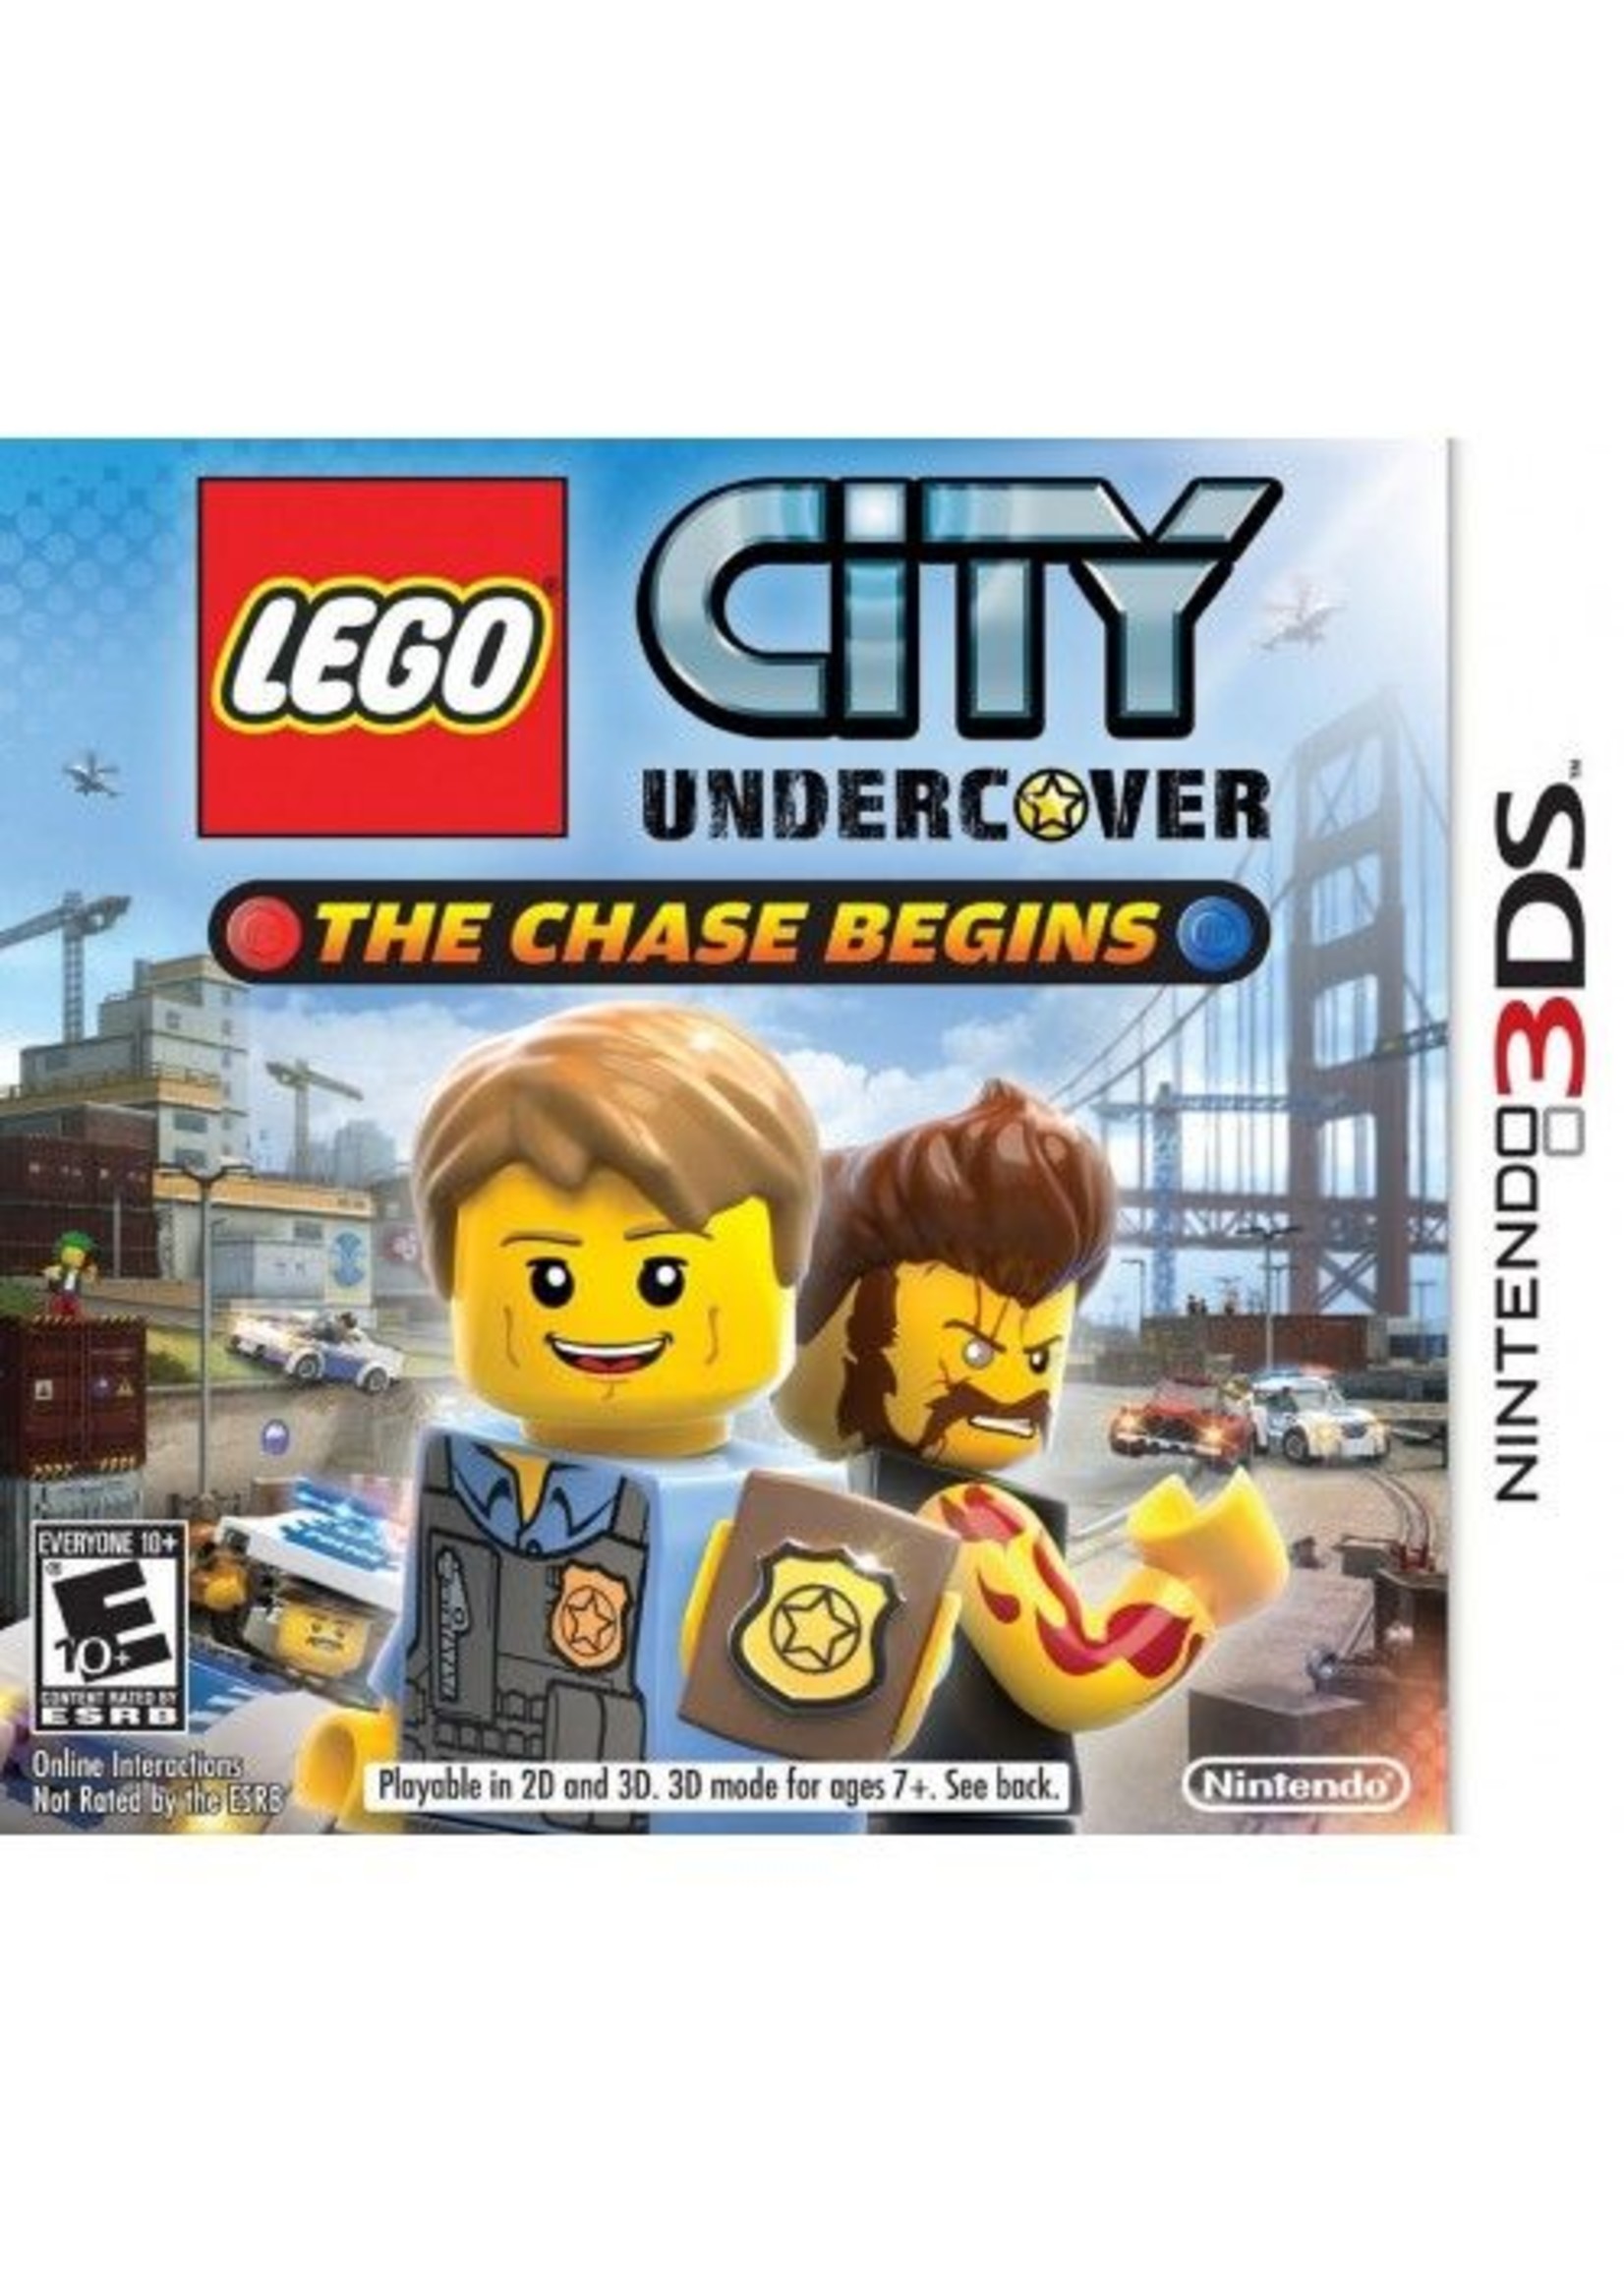 LEGO City Undercover - 3DS PrePlayed